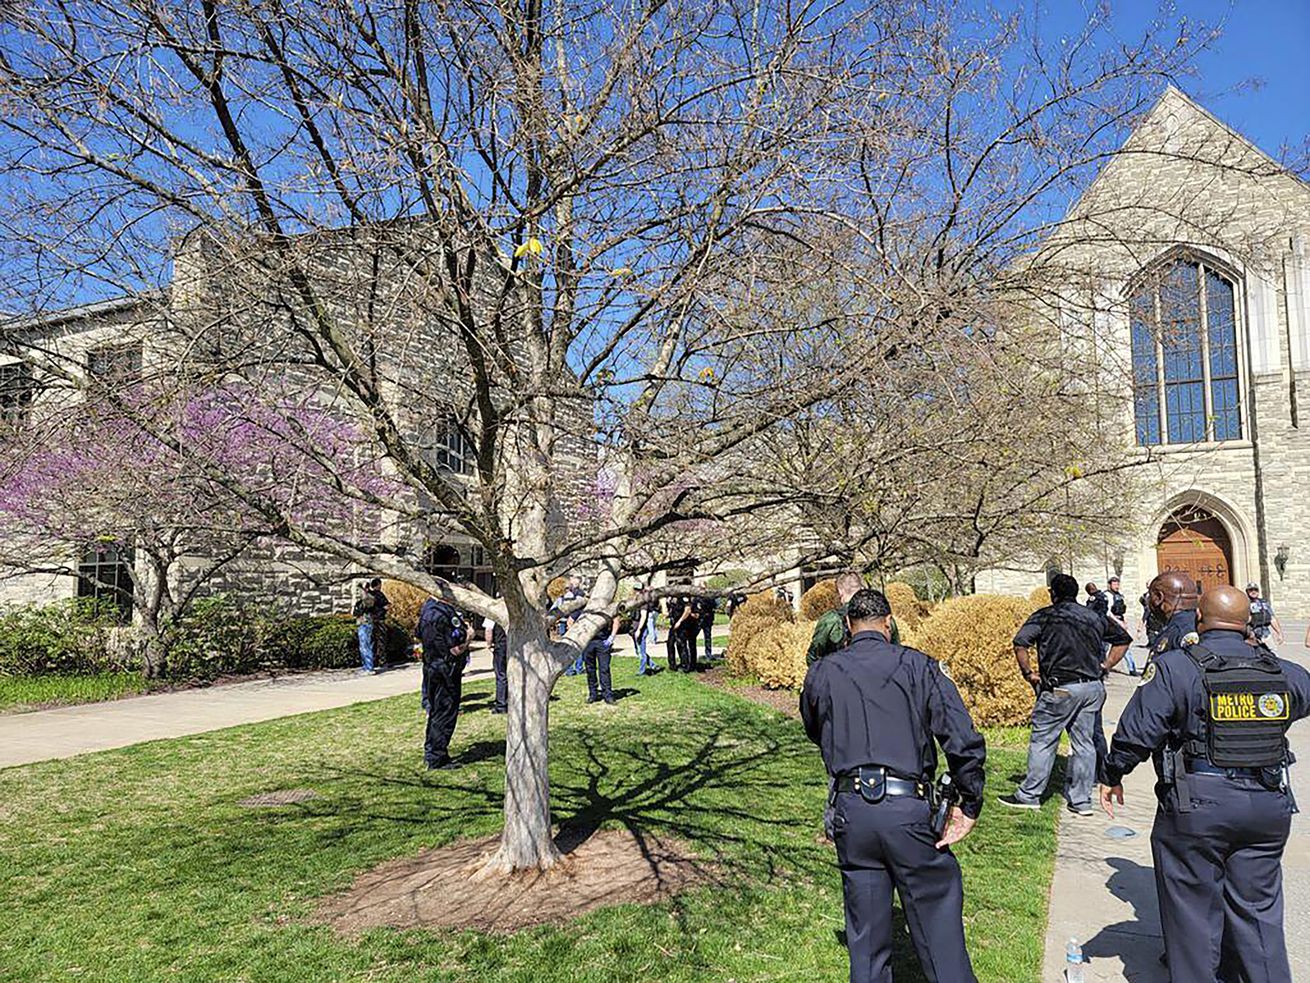 Blue uniformed officers mill about a green lawn with bare trees. Gothic inspired buildings can be seen in the background.